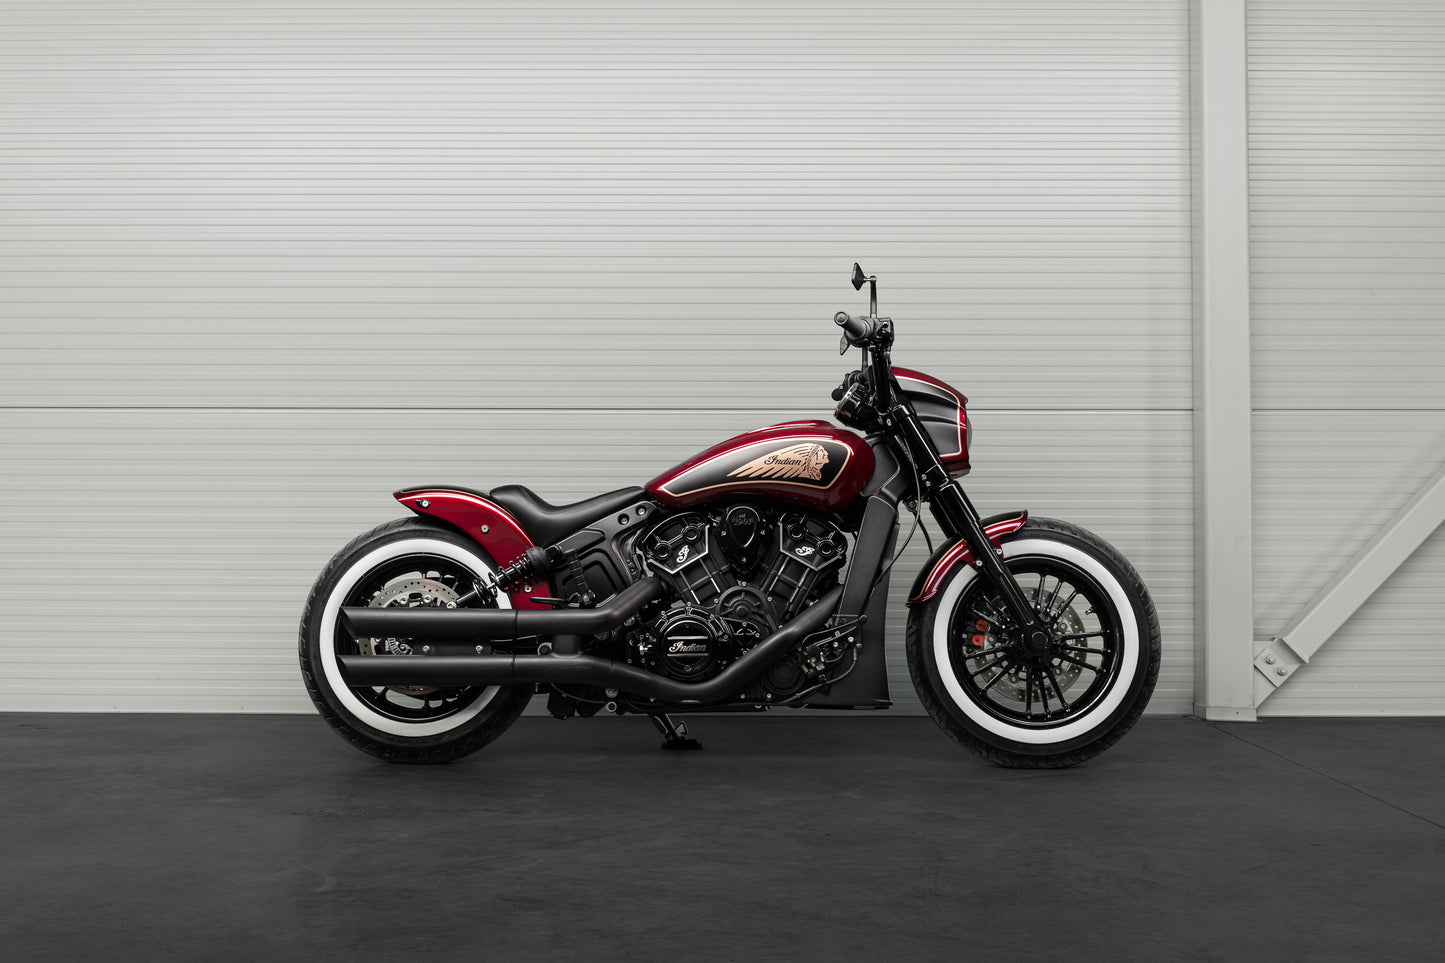 Harley Davidson motorcycle with Killer Custom "Tomahawk" rear fender from the side in a modern garage